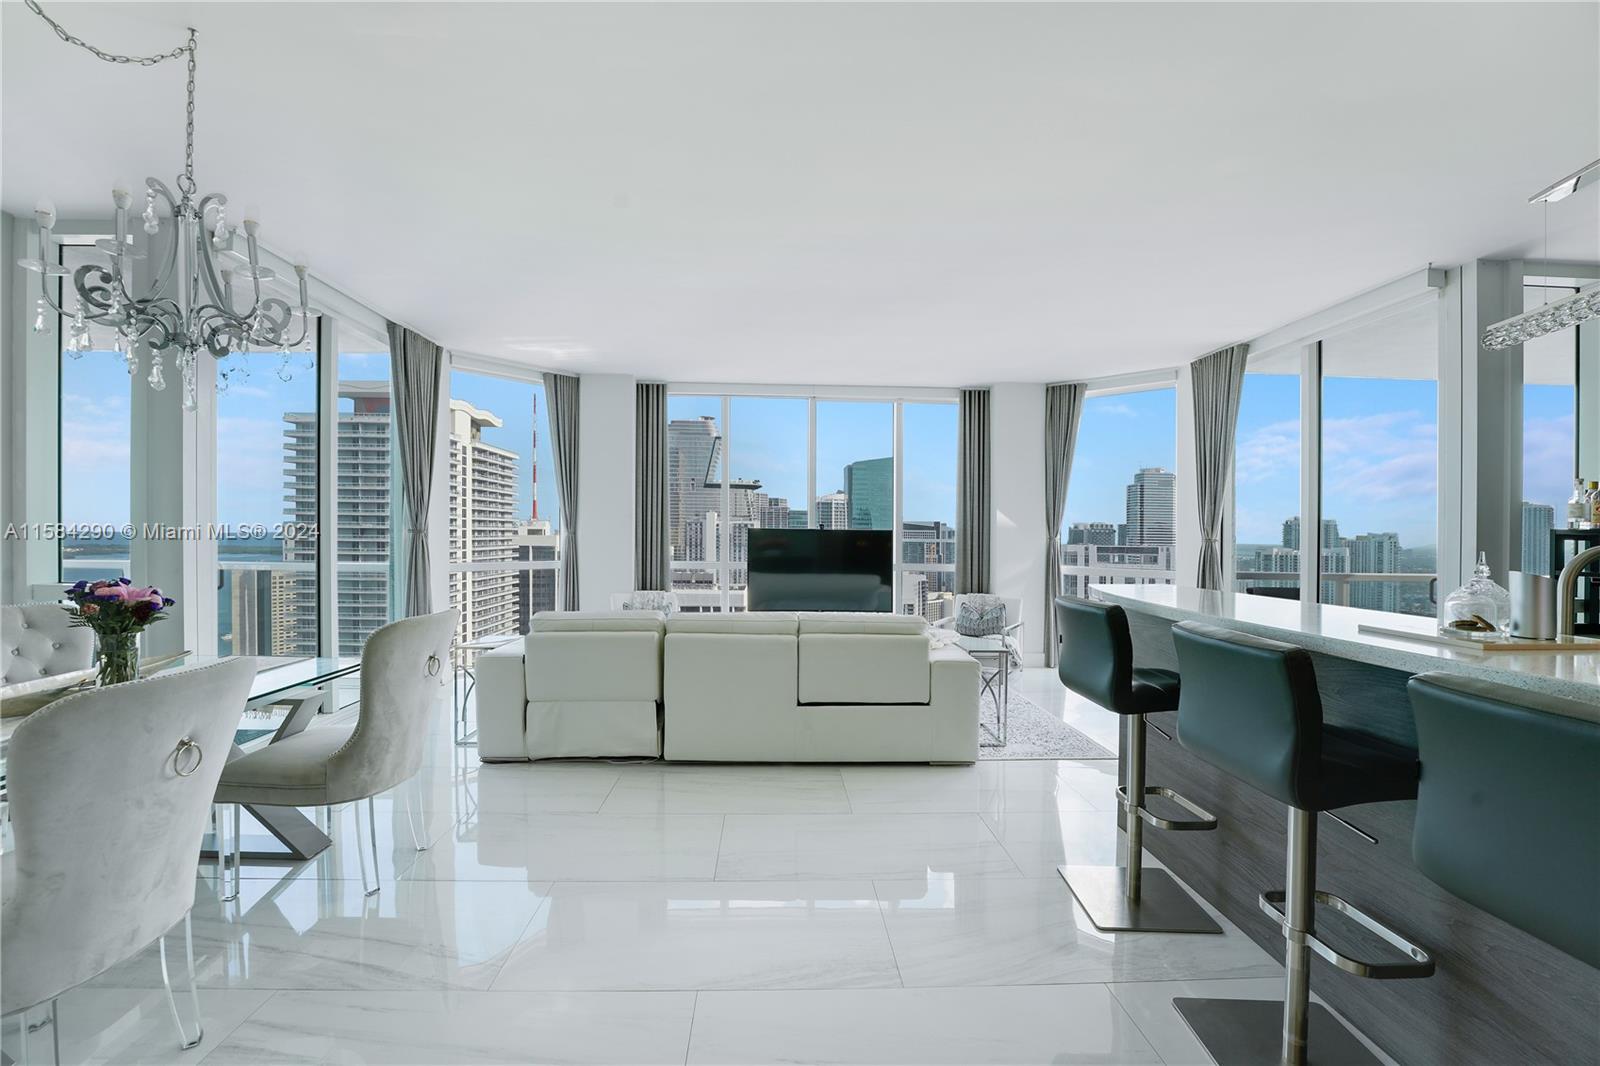 Experience the epitome of urban luxury in this exquisite 3-bed, 3-bath condo located in the heart of Miami’s epicenter. Enjoy breathtaking skyline views & floor-to-ceiling windows. Indulge your culinary skills in a modern kitchen w/quartz counters & top-of-the-line appliance. Entertain guests in the gorgeous modern living space & retreat to your primary suite w/a spa-like bath & walk-in closet. The 3rd bedroom boasts a built-in Murphy bed for flexible use of space. Only 4 units per floor offering ultimate privacy. Exclusive amenities include 4 pools, storage, gym w/ daily classes, spa & 24-hr security. Don’t miss a chance to own this gem perfectly situated in the city’s hottest neighborhood. Enjoy bayfront park or walk to Miami World Center to enjoy dining, shopping & entertainment.